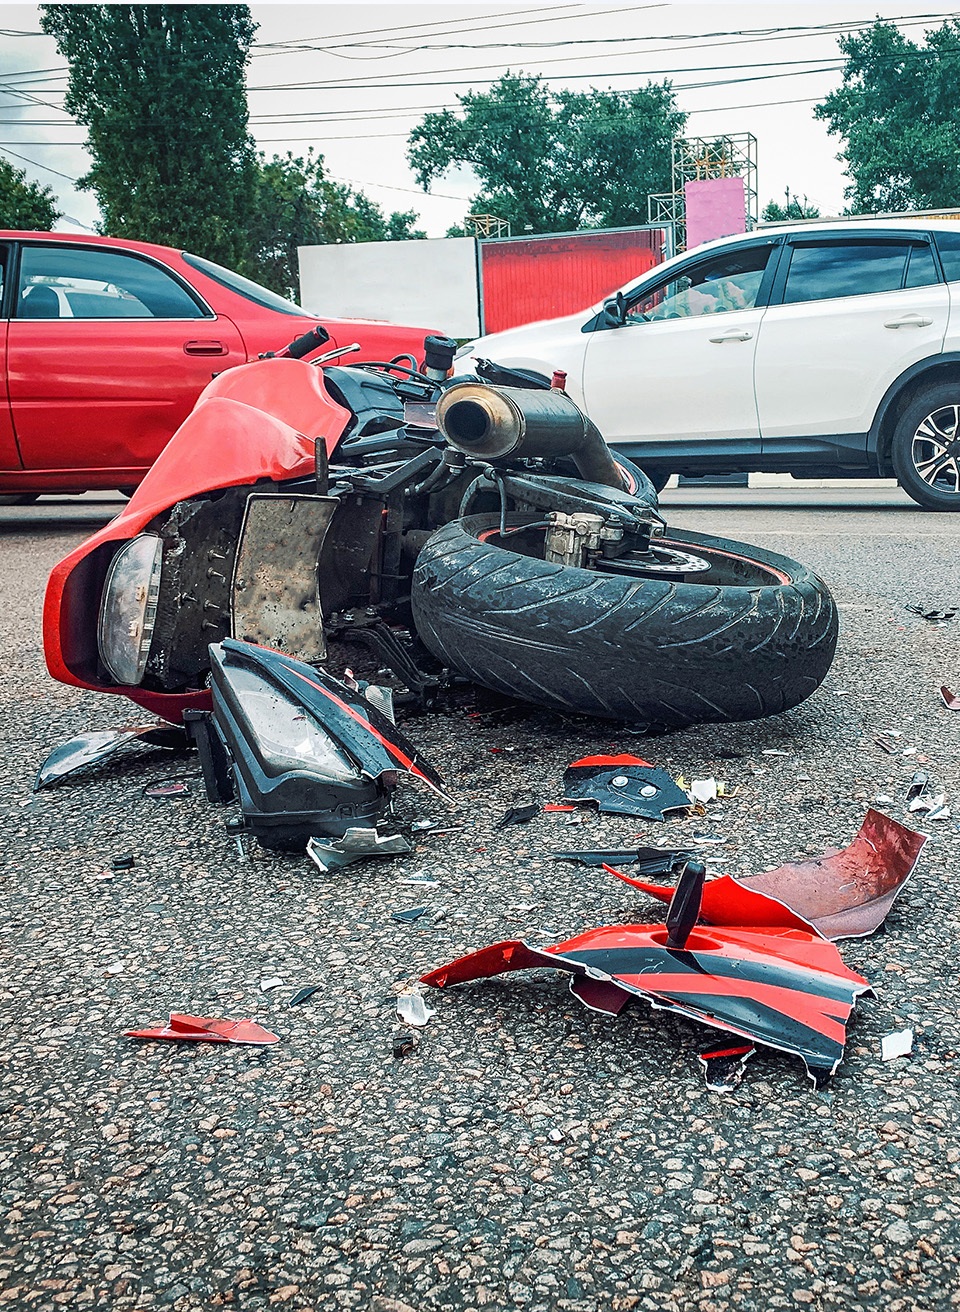 A crashed motorcycle lying on the street with pieces around it.